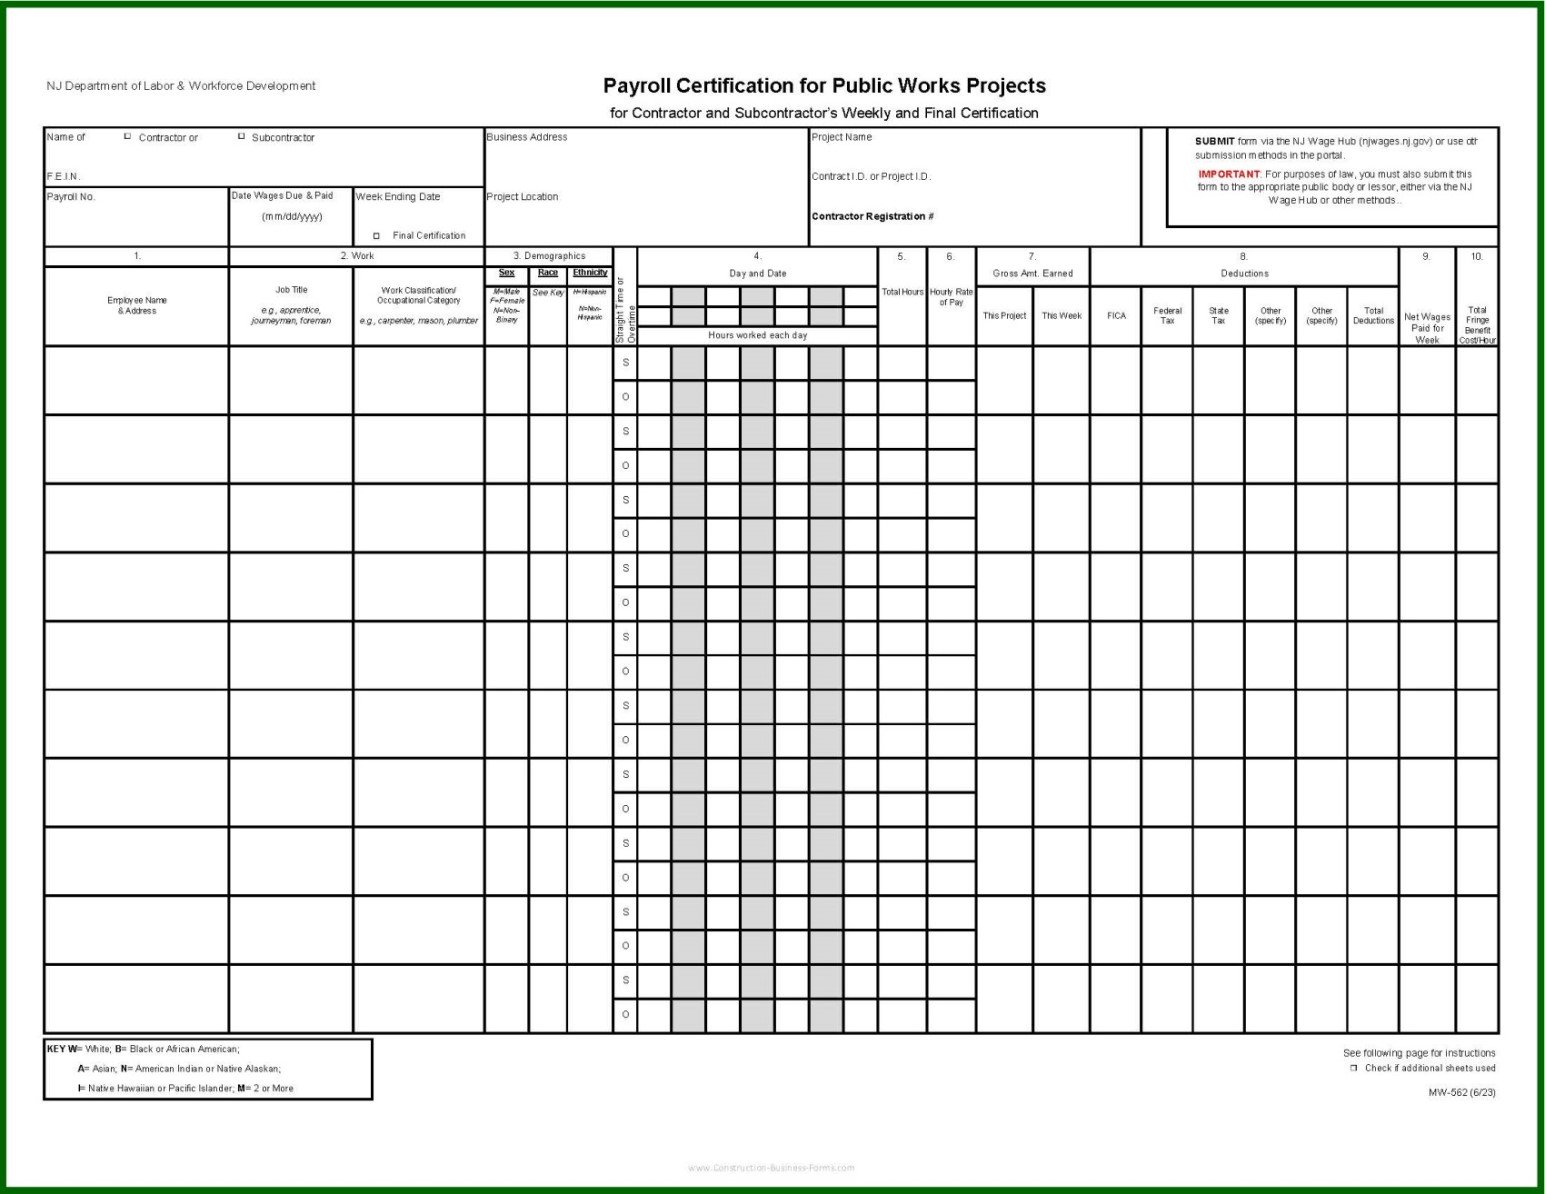 MW-562 Certified Payroll Form (and other certified payroll forms)